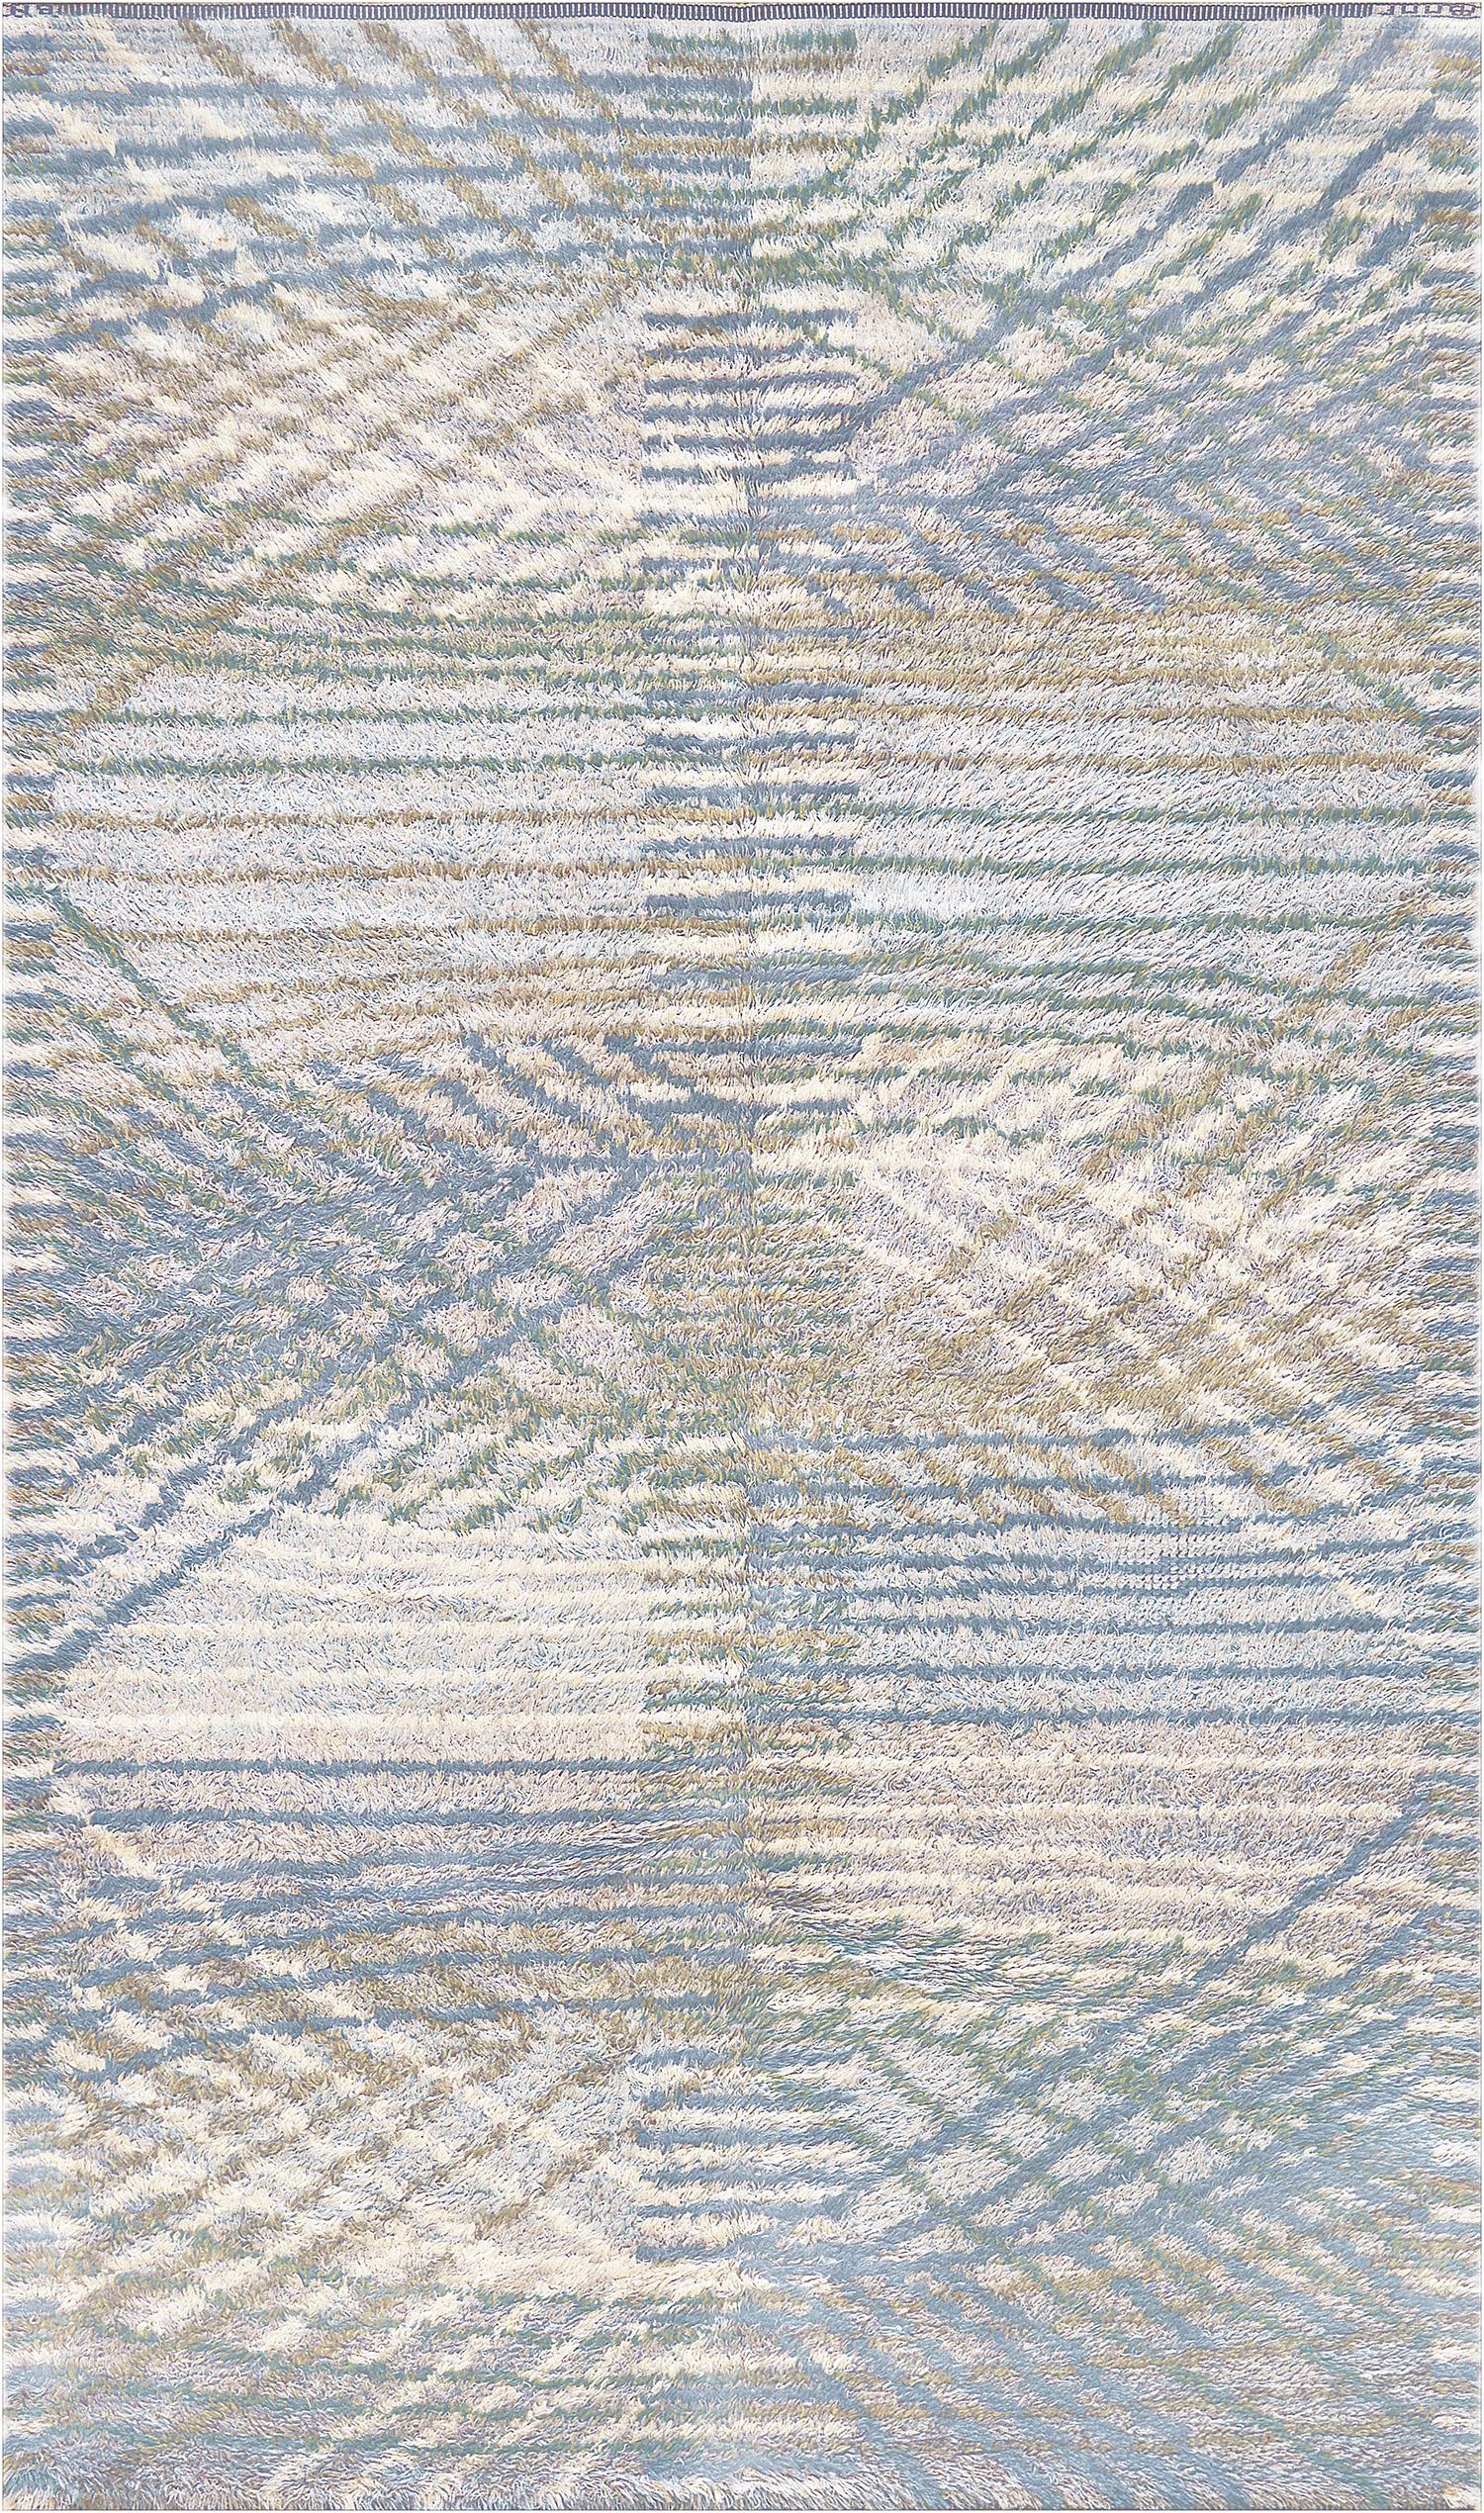 Hand-Woven Early 20th Century Marta Maas-Fjetterström AB Swedish Deco Rug by Barbro Nilsson For Sale